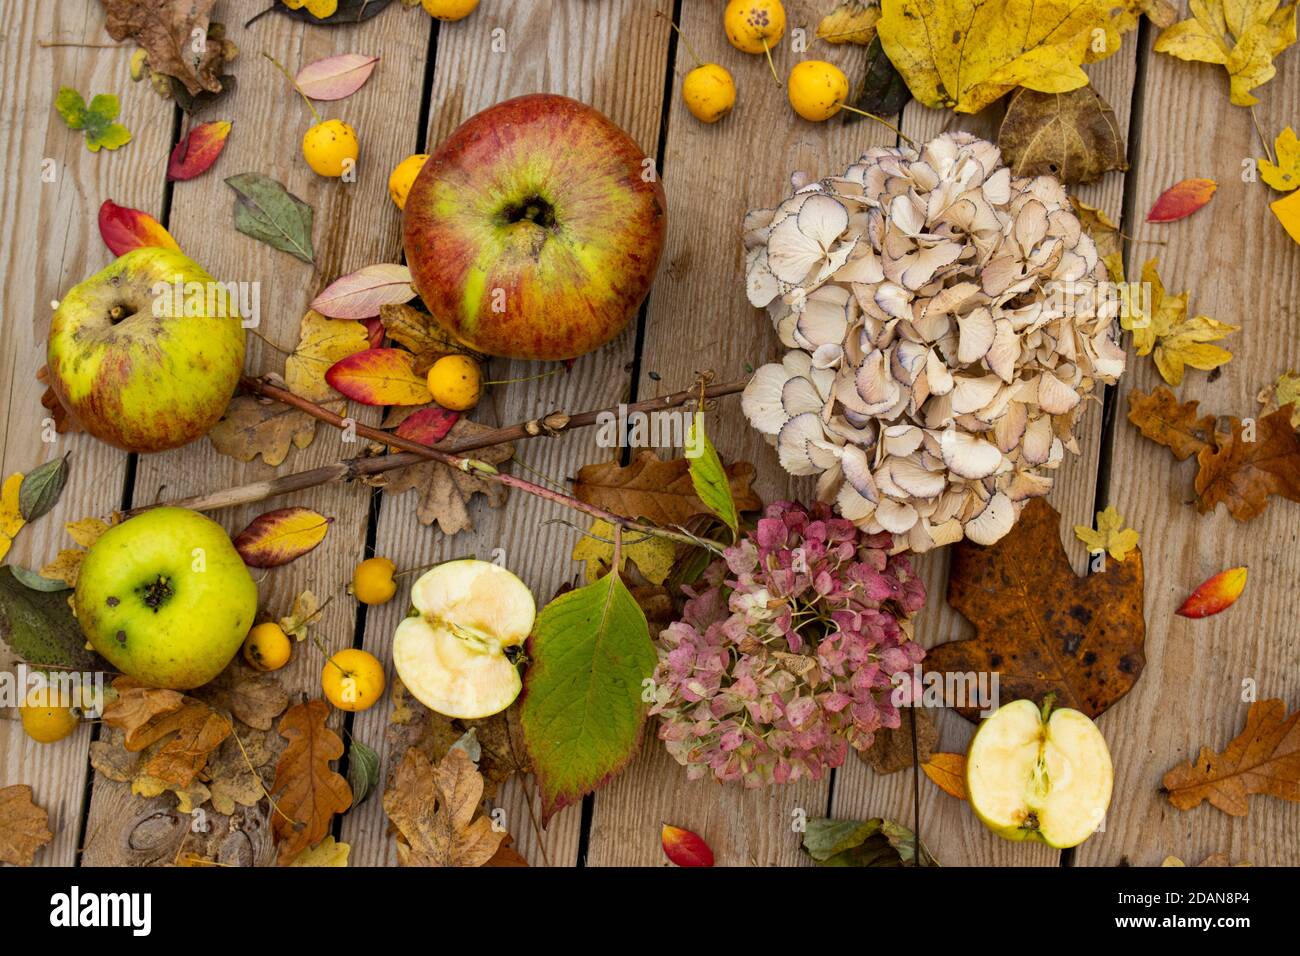 An autumnal display of a variety of apples, autumn leaves and dried hydrangeas on a wooden table top Stock Photo